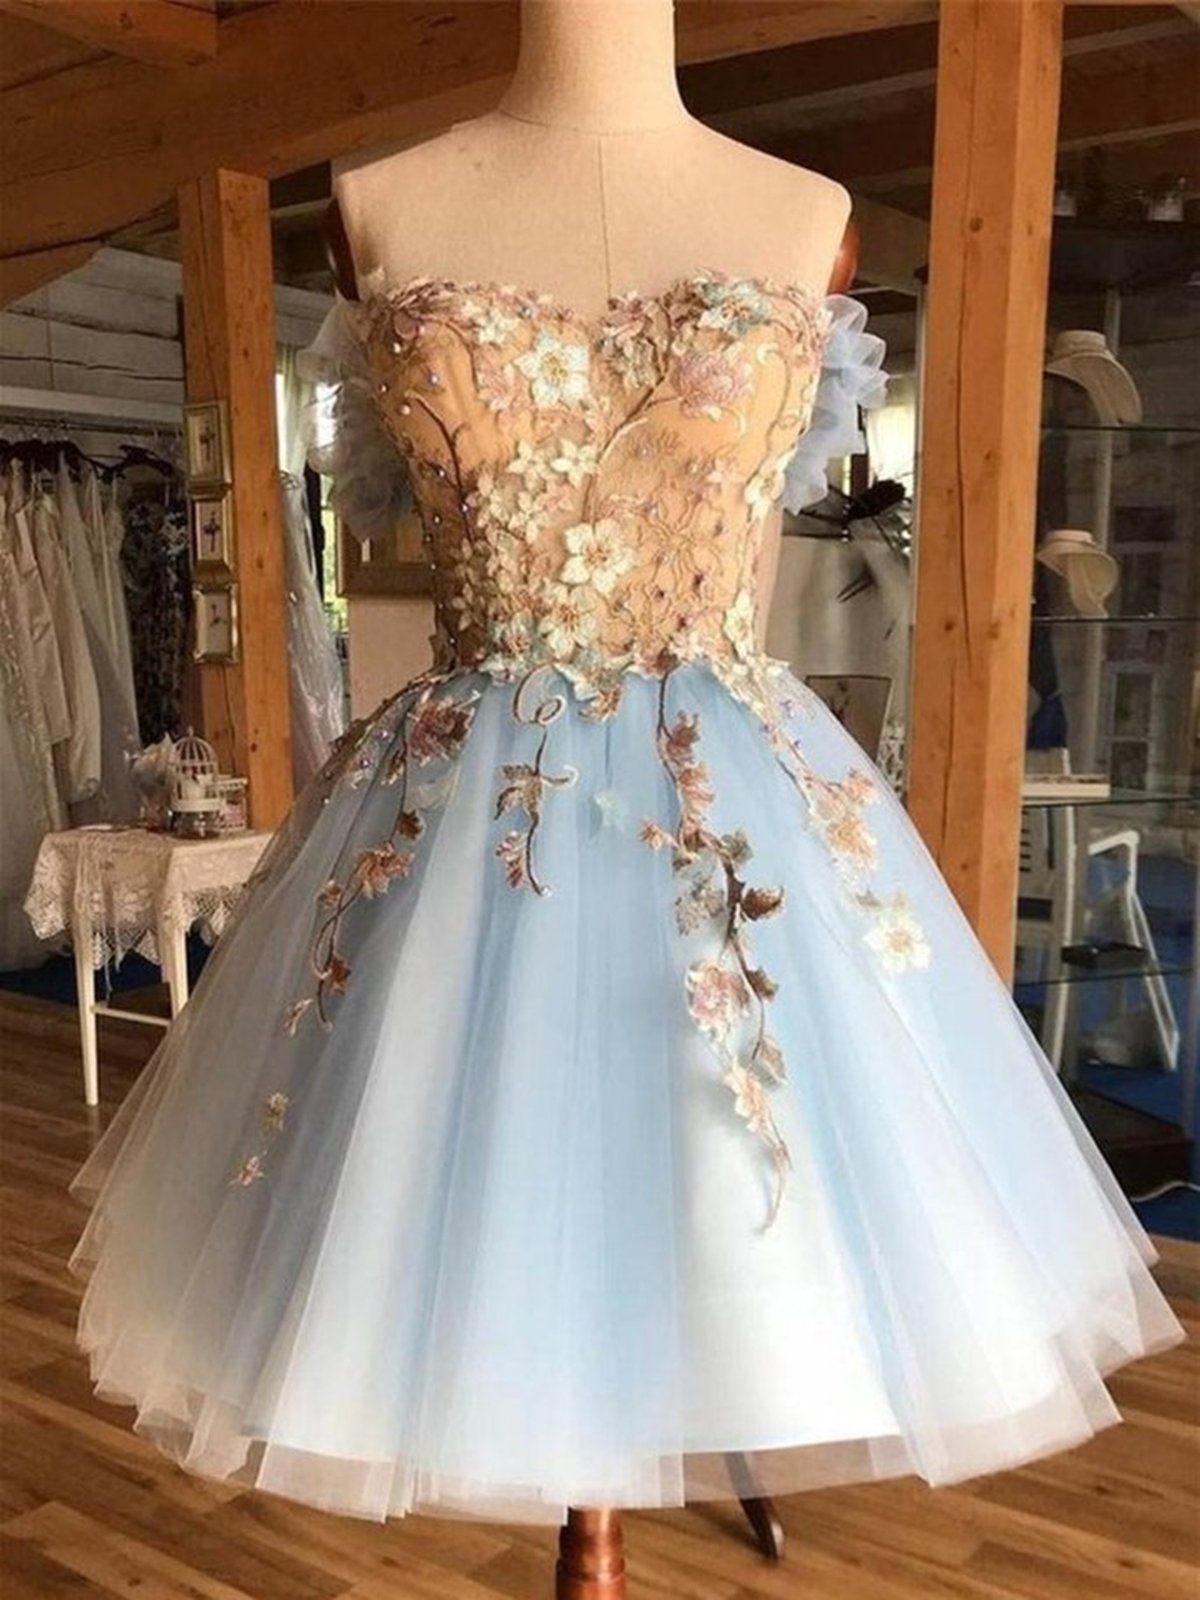 Light Blue Prom Dress Outfit
  Ideas for Women